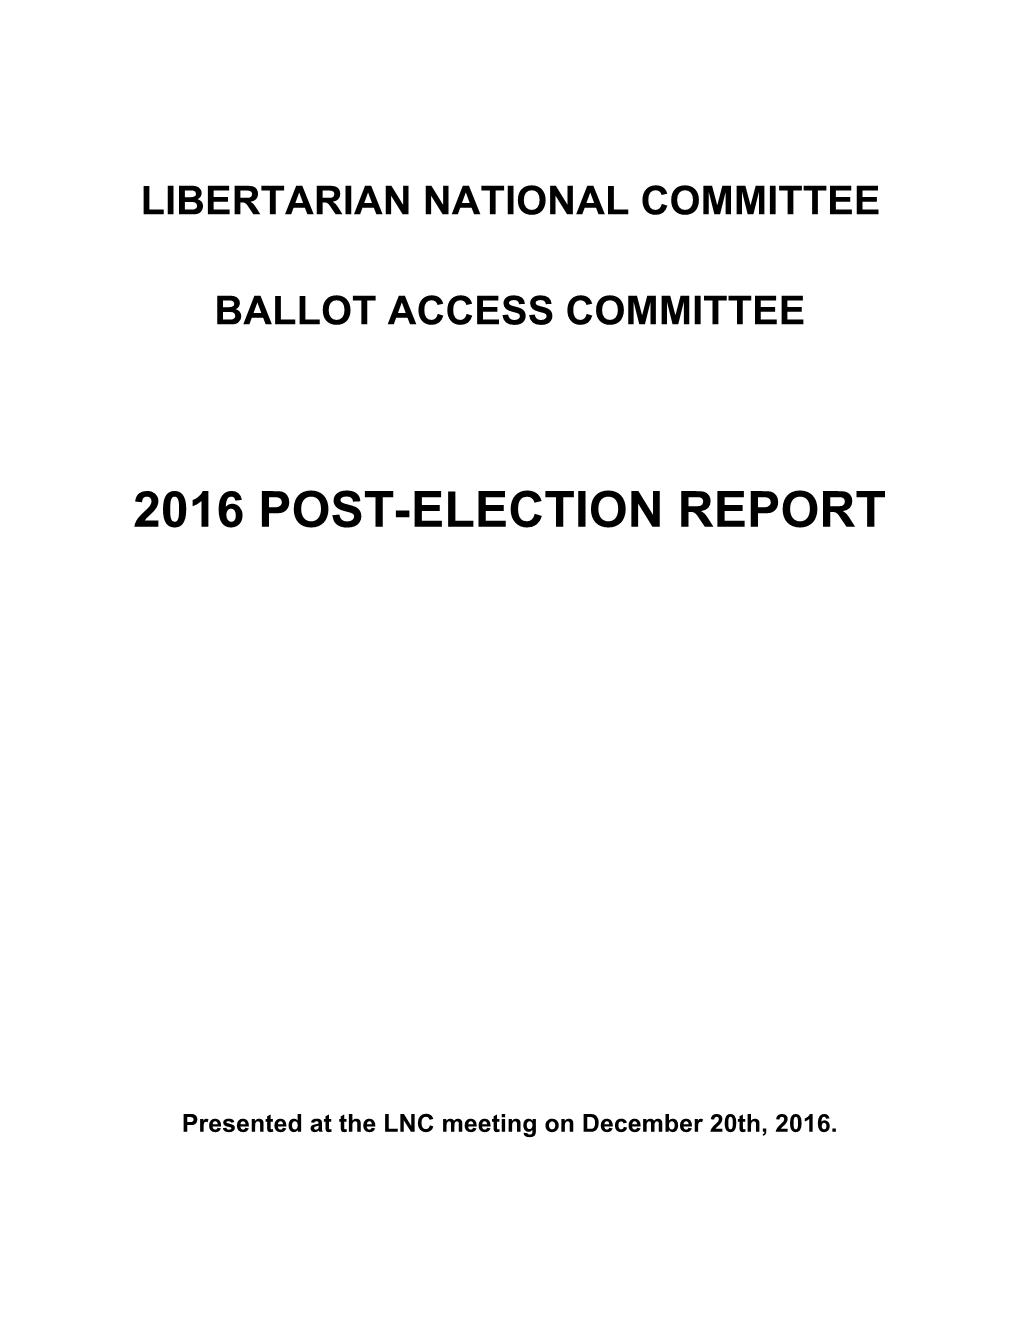 2016 Post-Election Report